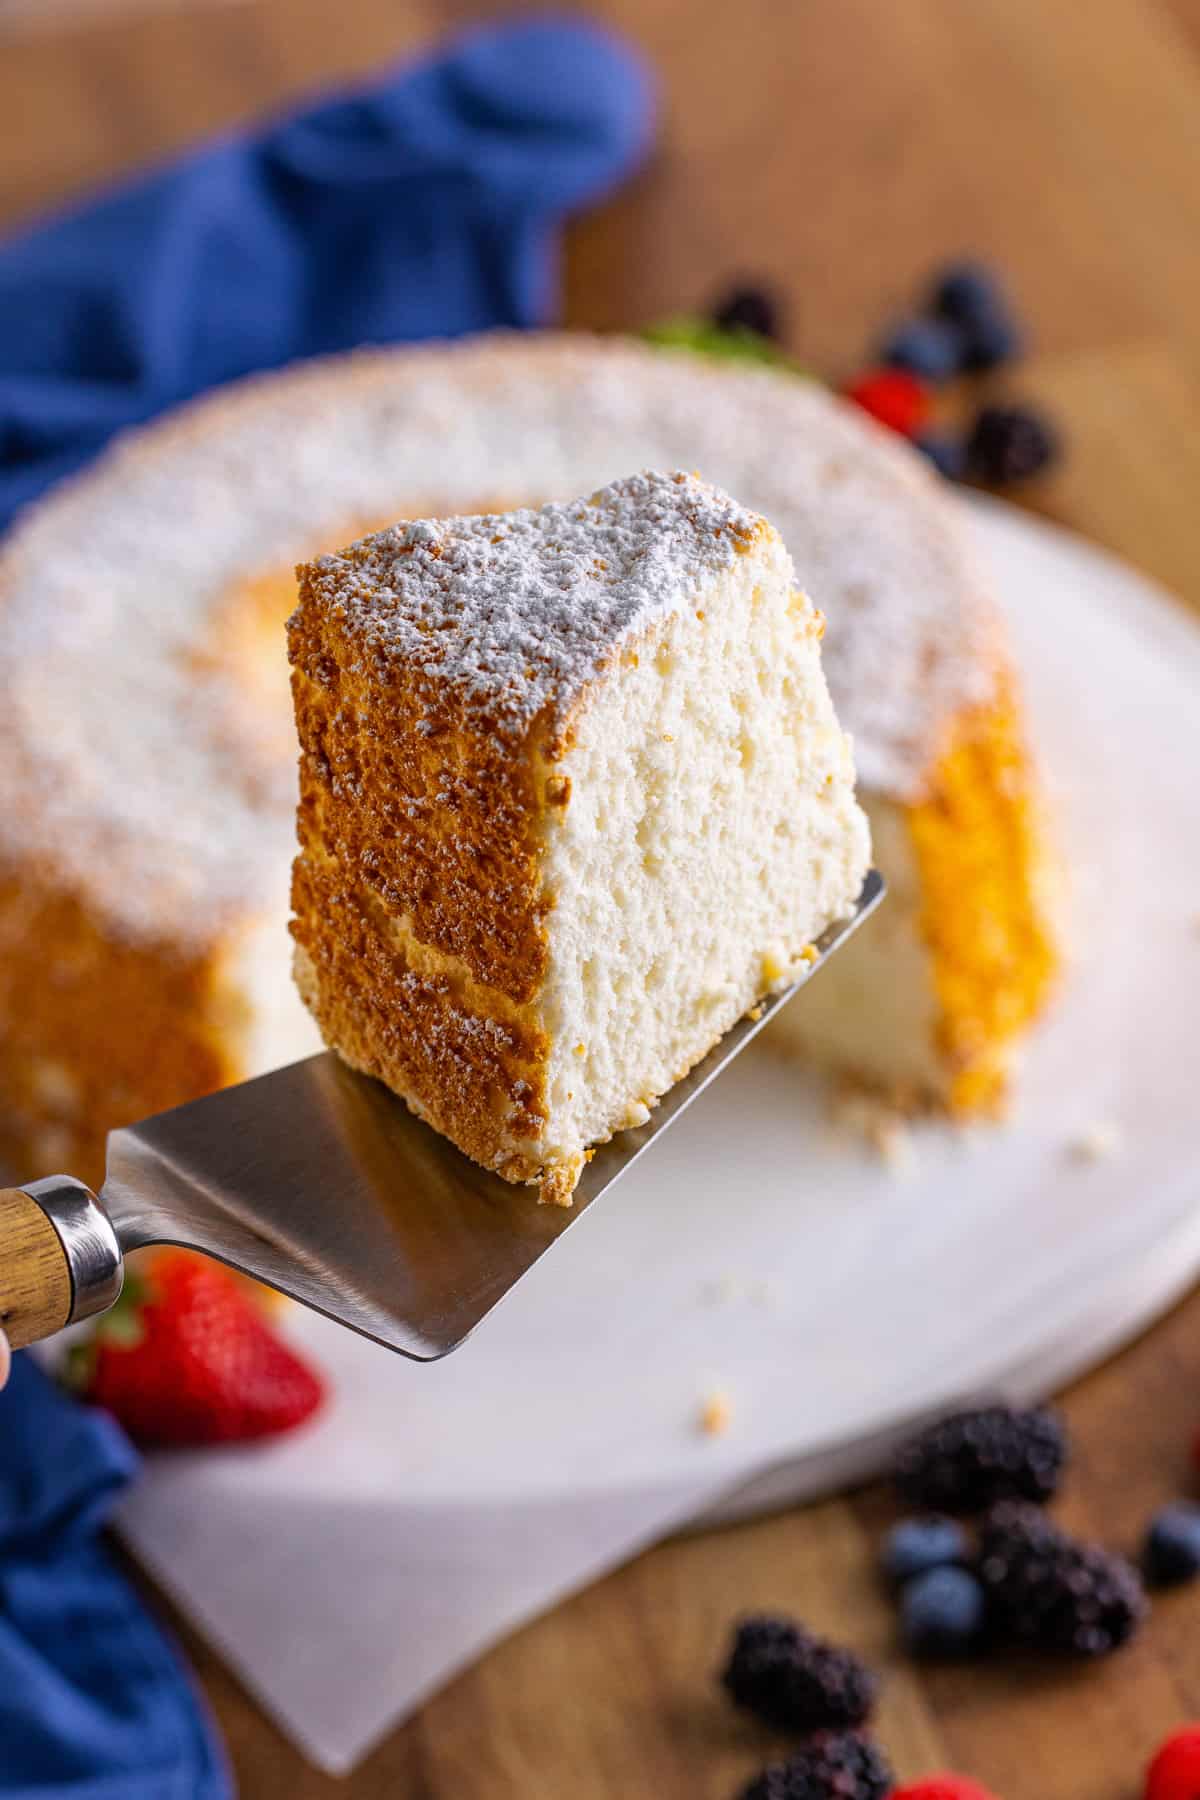 Slice of angel food cake being lifted from rest of cake with a silver cake server.